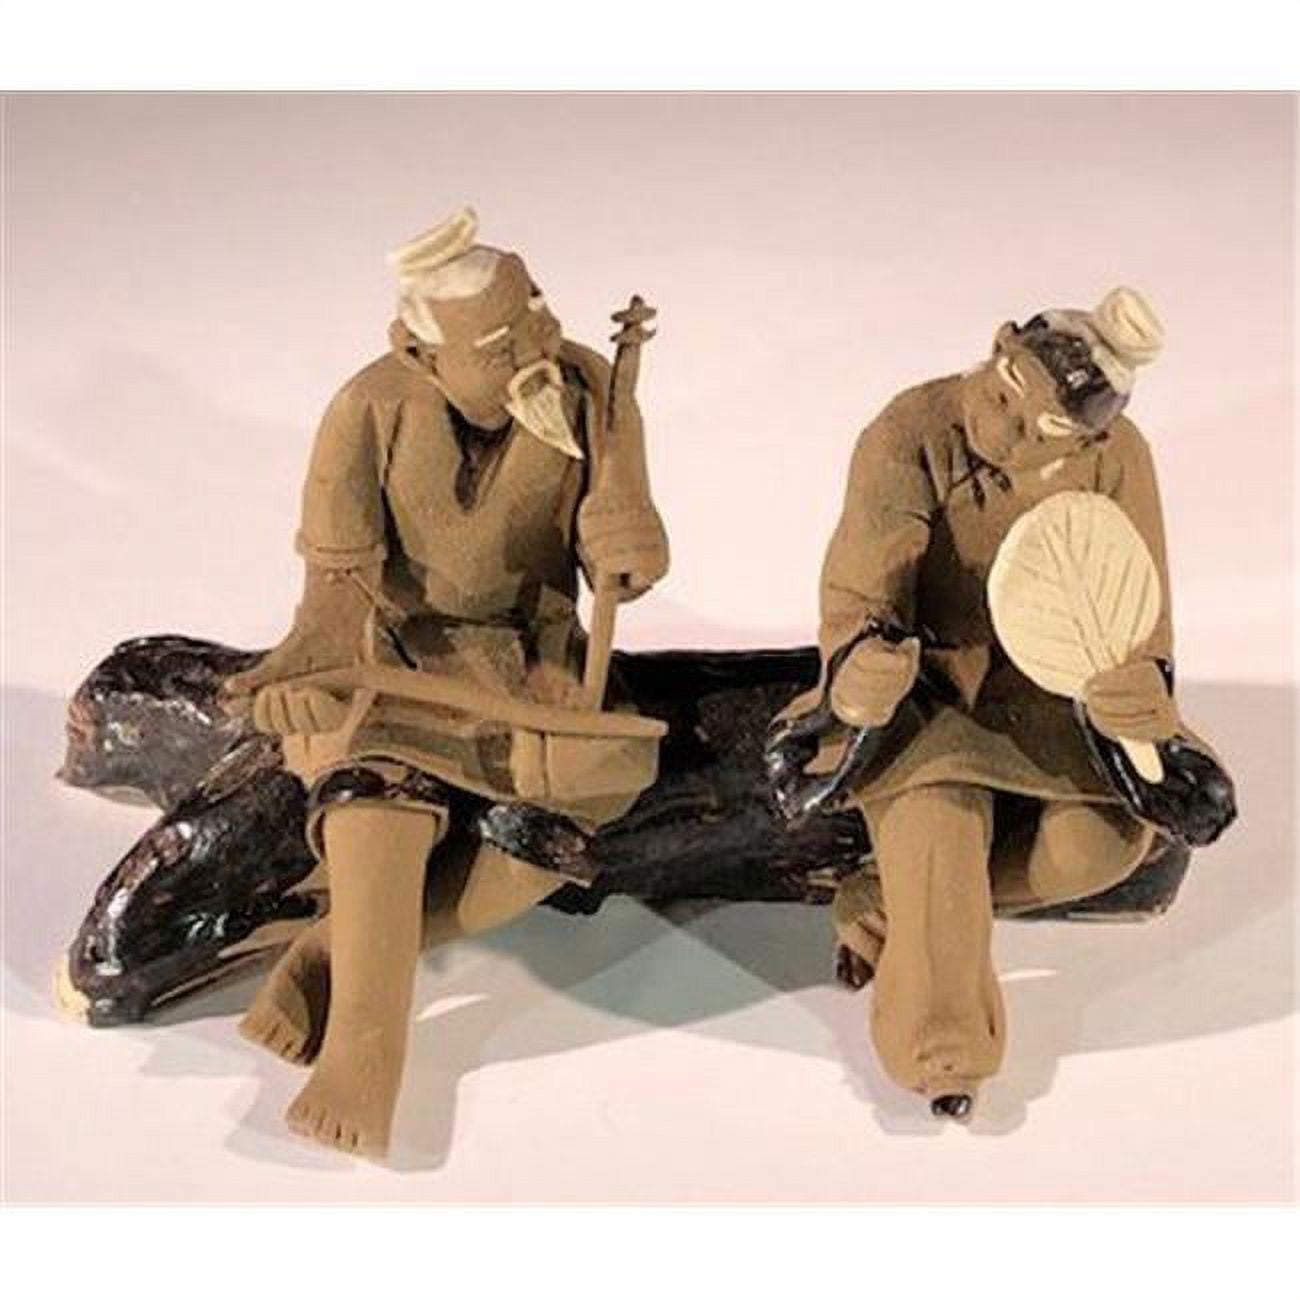 Picture of Bonsai Boy e3410 2.5 in. Miniature Ceramic Figurine - Two Men Sitting On Bench Playing Musical Instrument